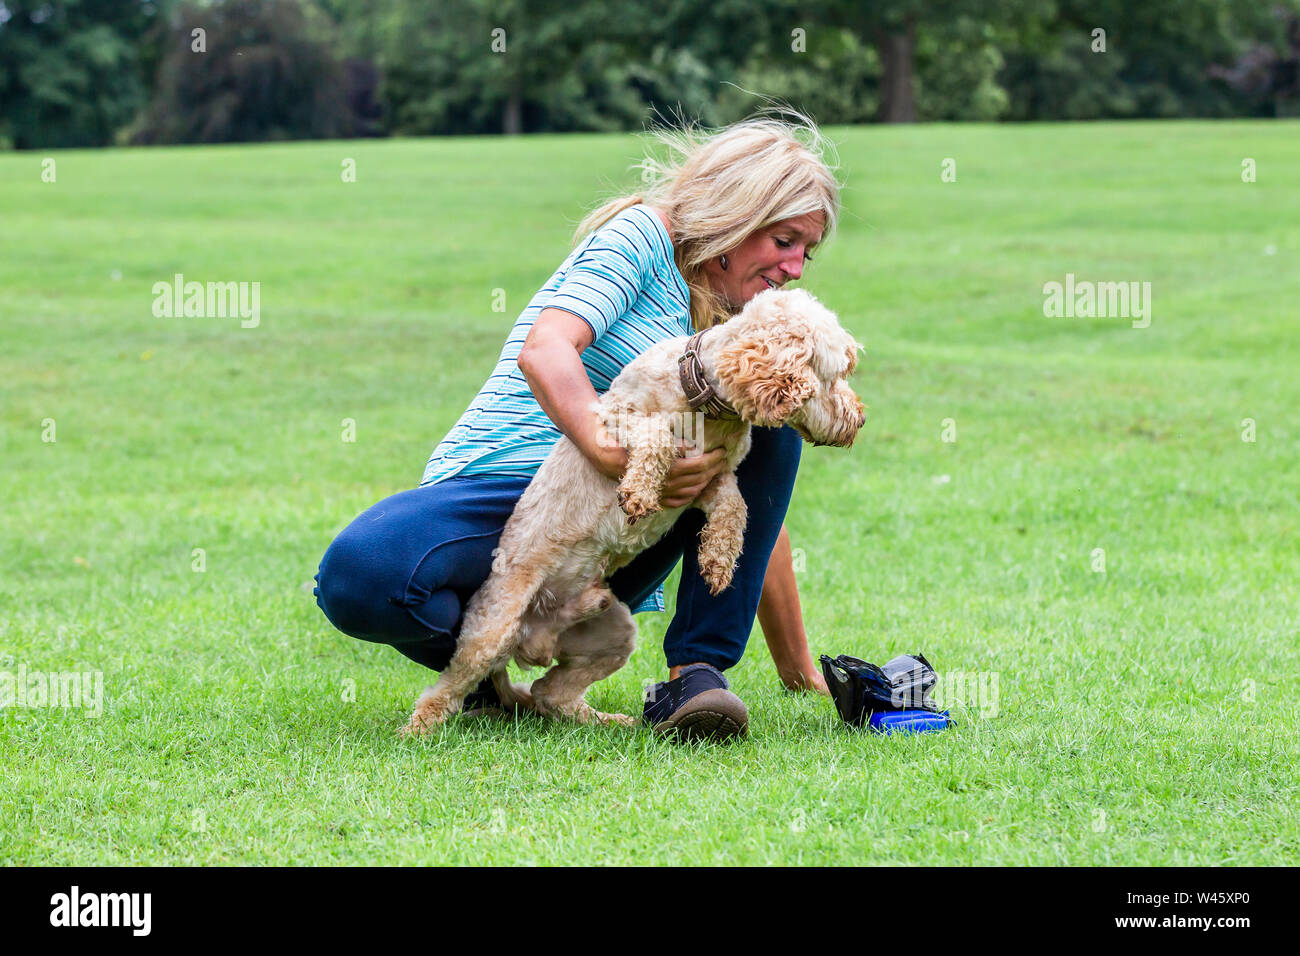 Northampton UK. 20th July 2019. Weather. Abington Park. A blond haired lady having fun with the dog on the morning walk, forecast is for rain later in the day. Credit: Keith J Smith./Alamy Live News Stock Photo